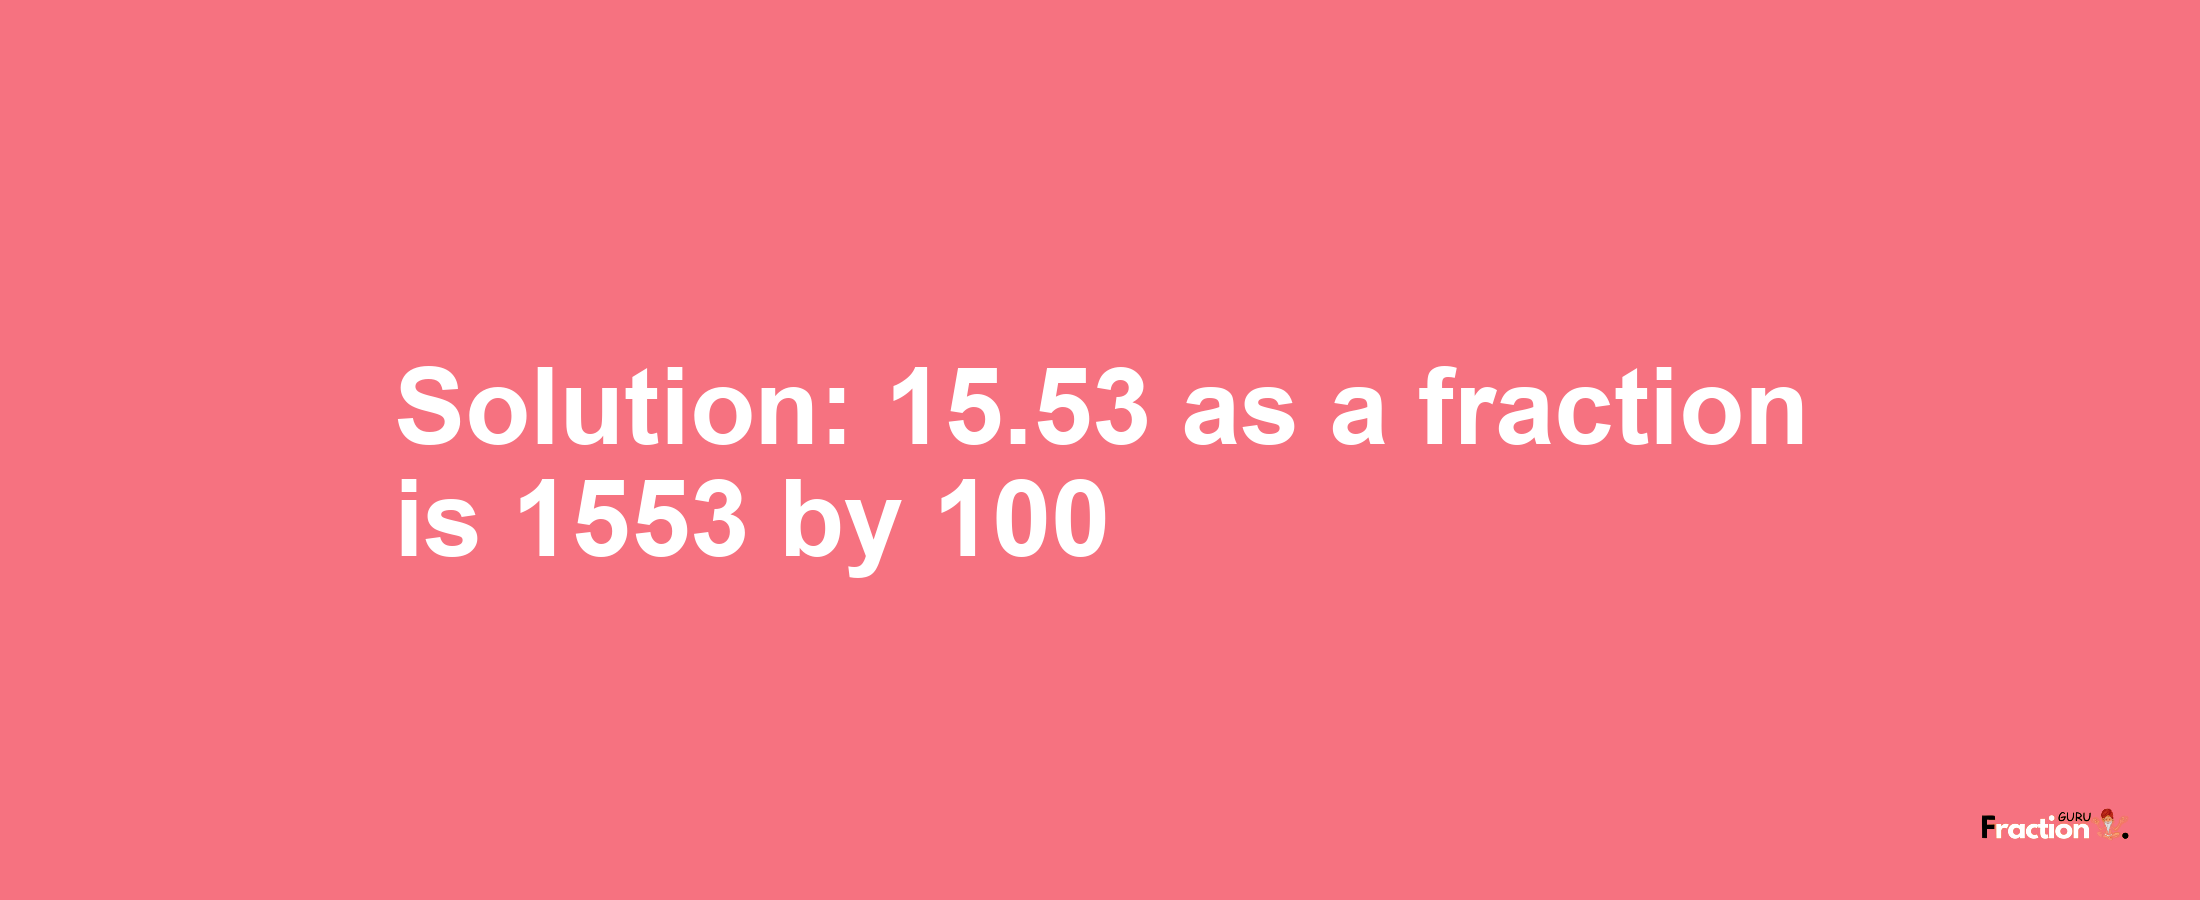 Solution:15.53 as a fraction is 1553/100